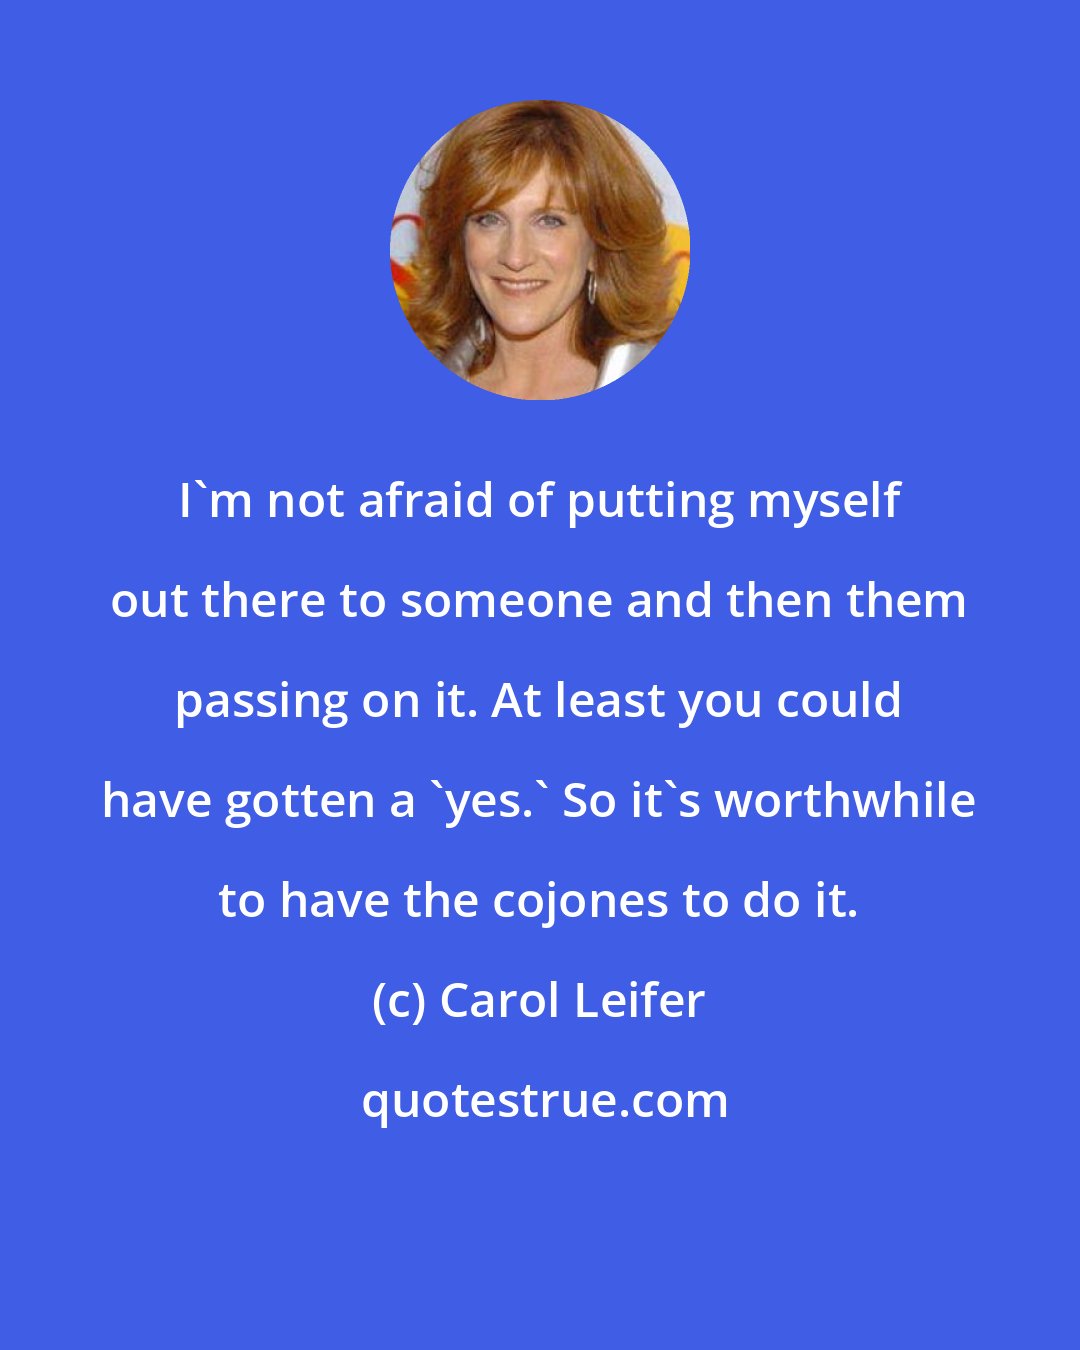 Carol Leifer: I'm not afraid of putting myself out there to someone and then them passing on it. At least you could have gotten a 'yes.' So it's worthwhile to have the cojones to do it.